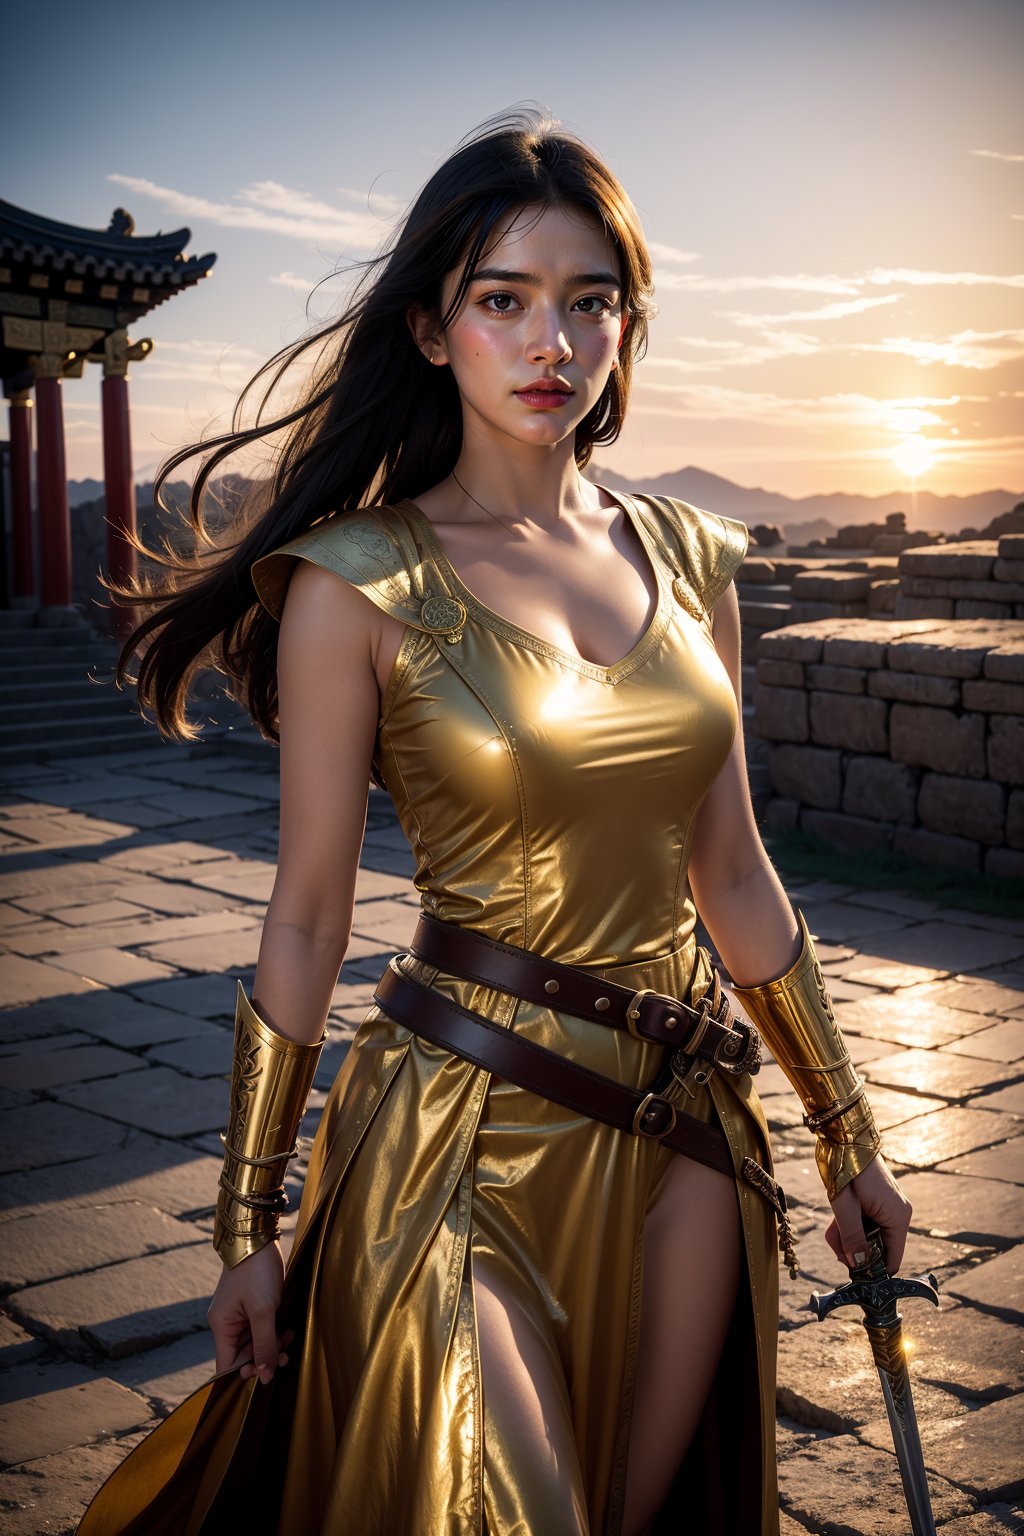 Against the warm glow of sunset, a valorous young maiden stands at the threshold of an ancient temple, her sword held high, its golden hilt glinting in the fading light as her flowing garb and leather belt are swept back by the wind, her determined gaze fixed on some unseen challenge within.